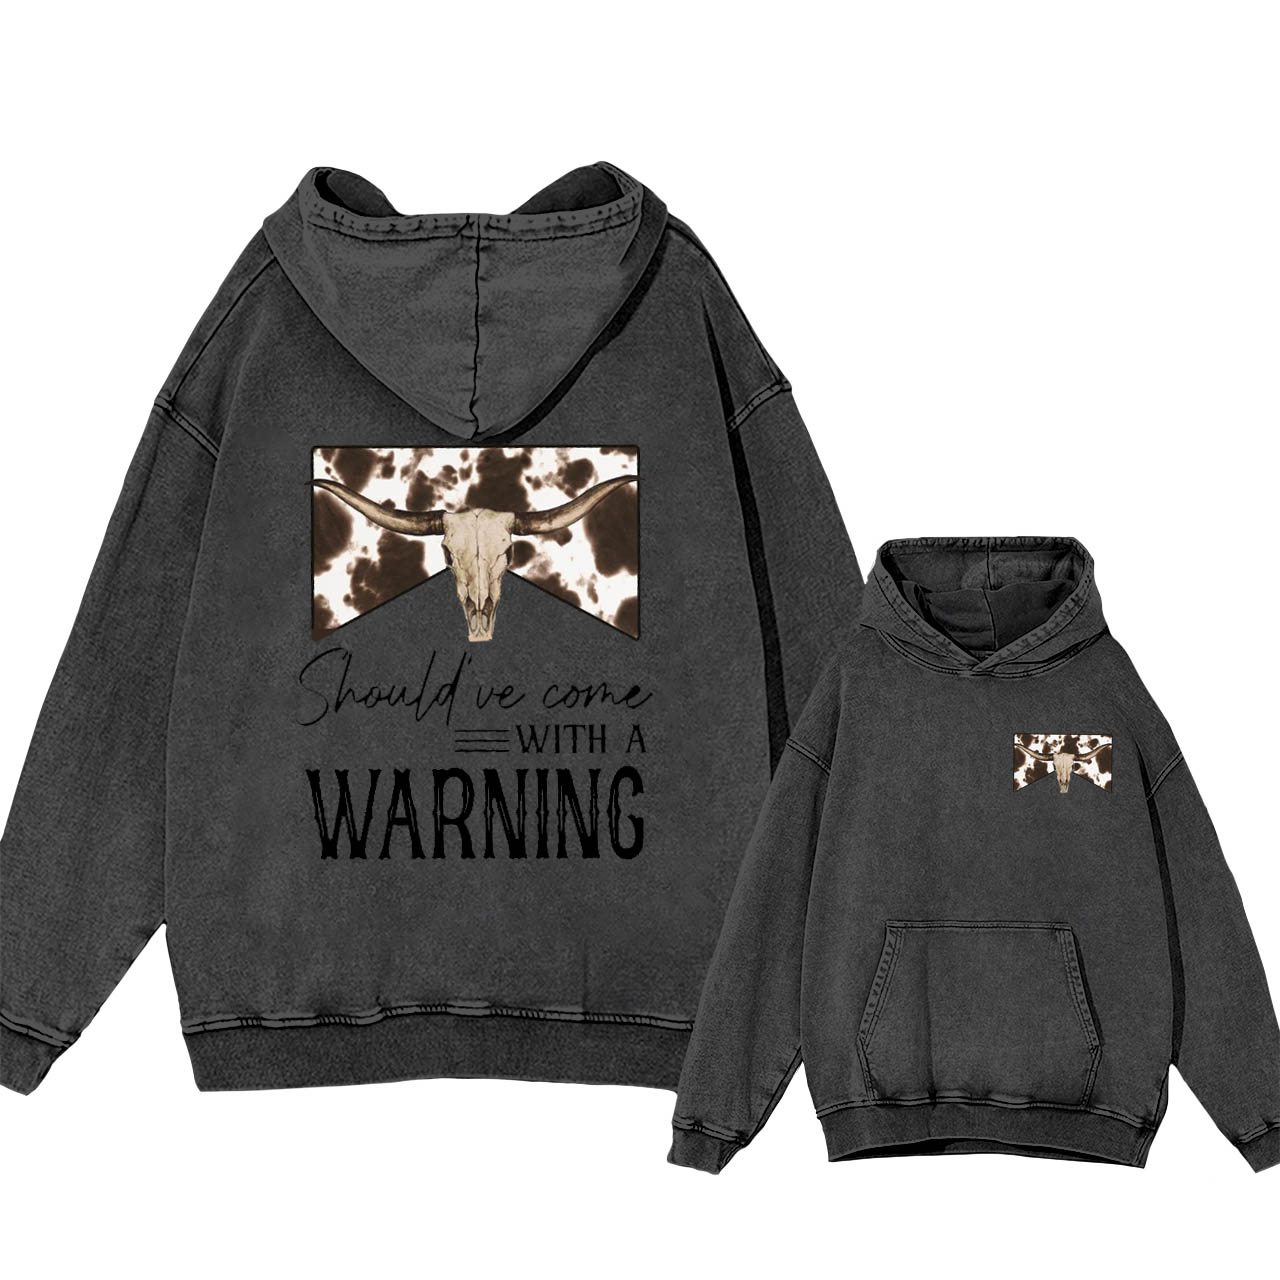 Should've Come With A Warnings Hoodies